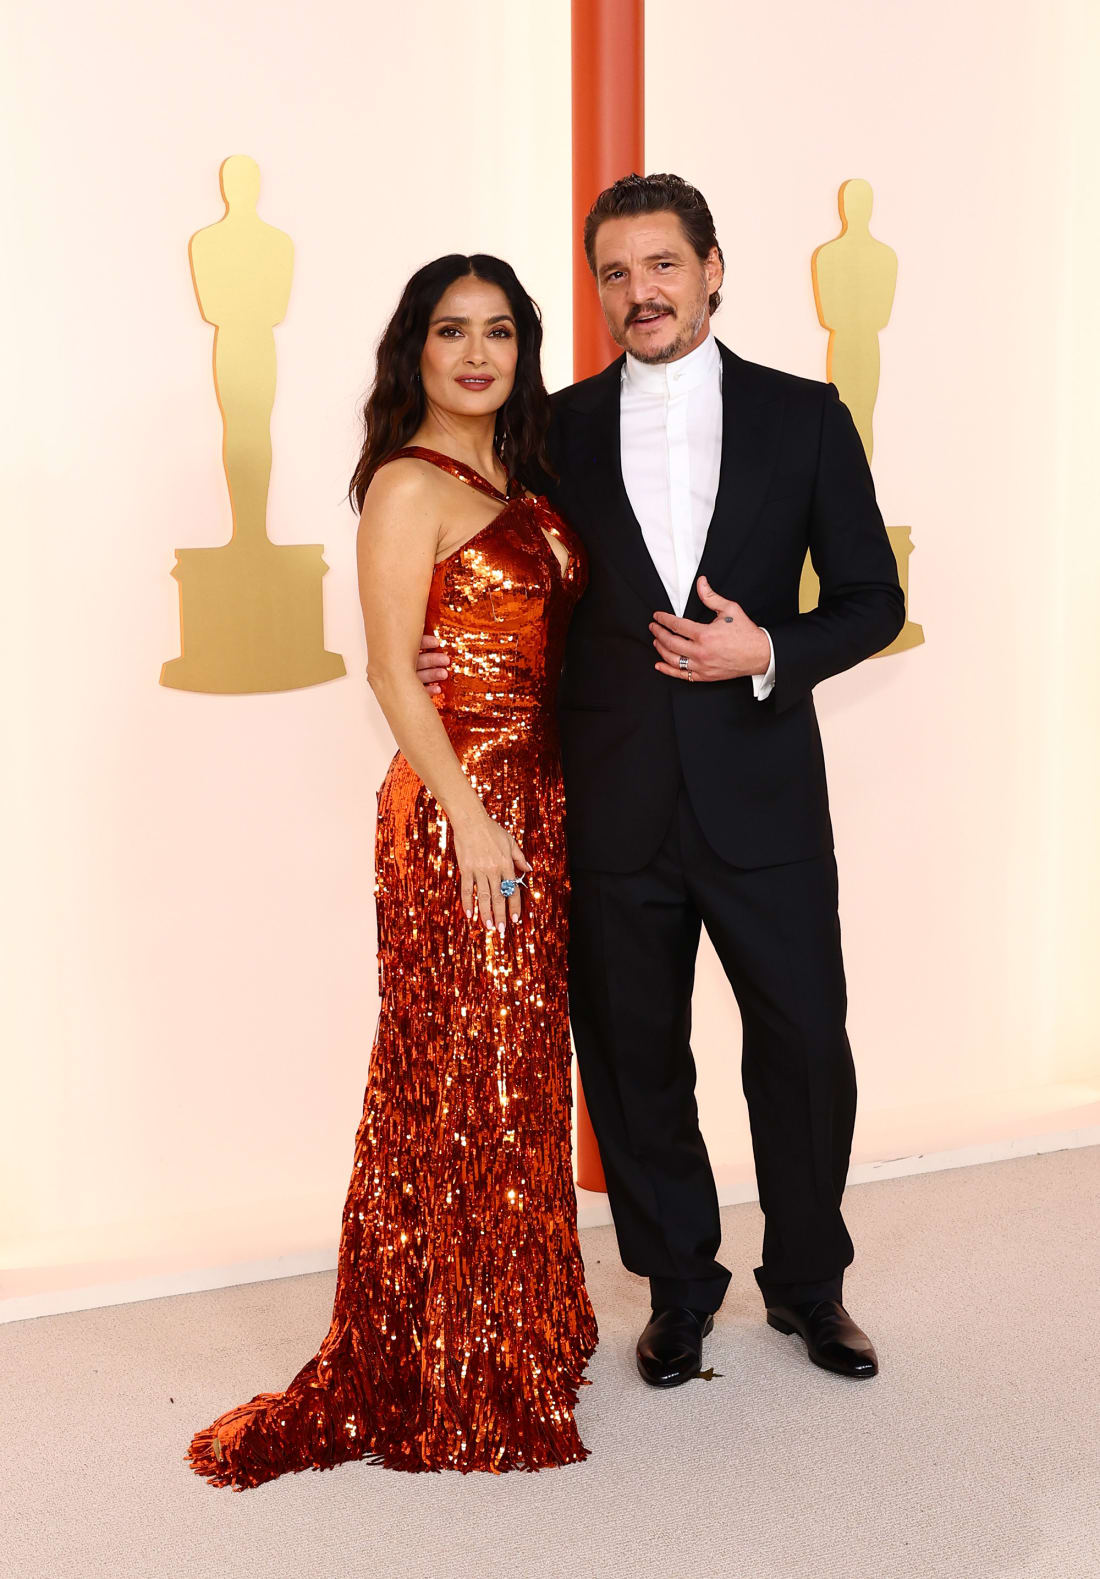 Salma Hayek and Pedro Pascal wearing Gucci and Zegna, respectively.